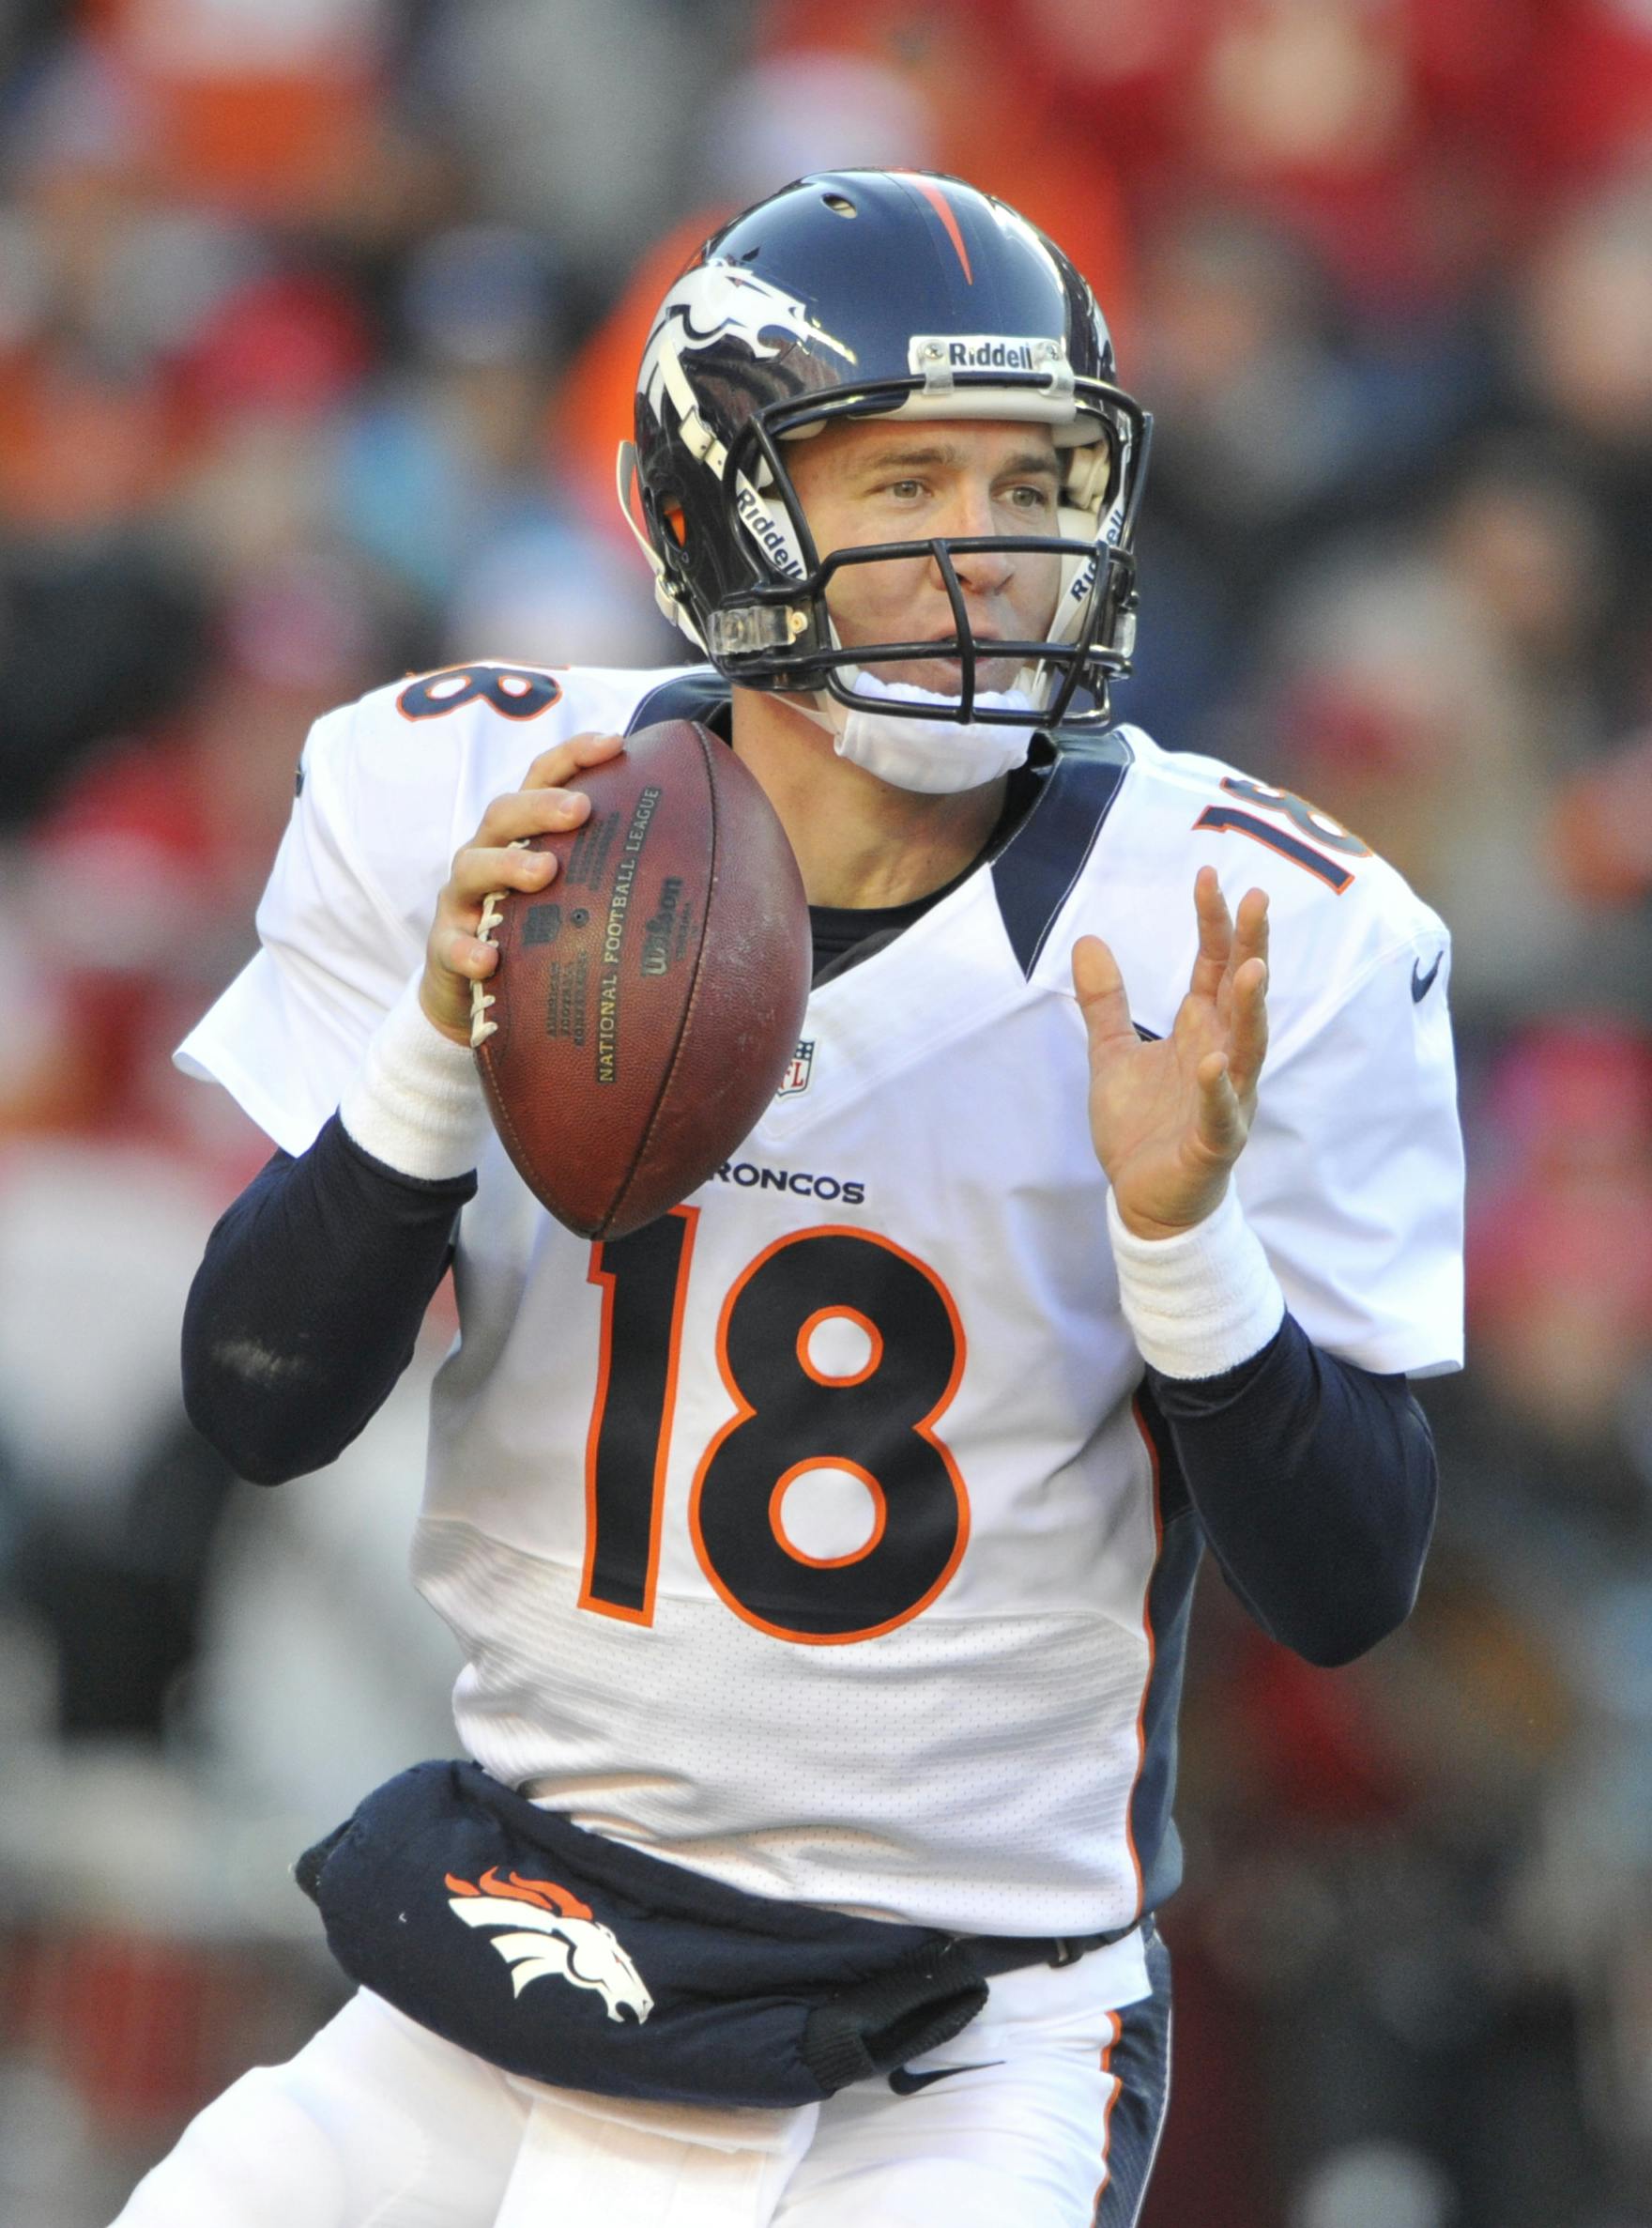 Peyton Manning to Deliver Keynote Address at 2015 The Rental Show | Construction News